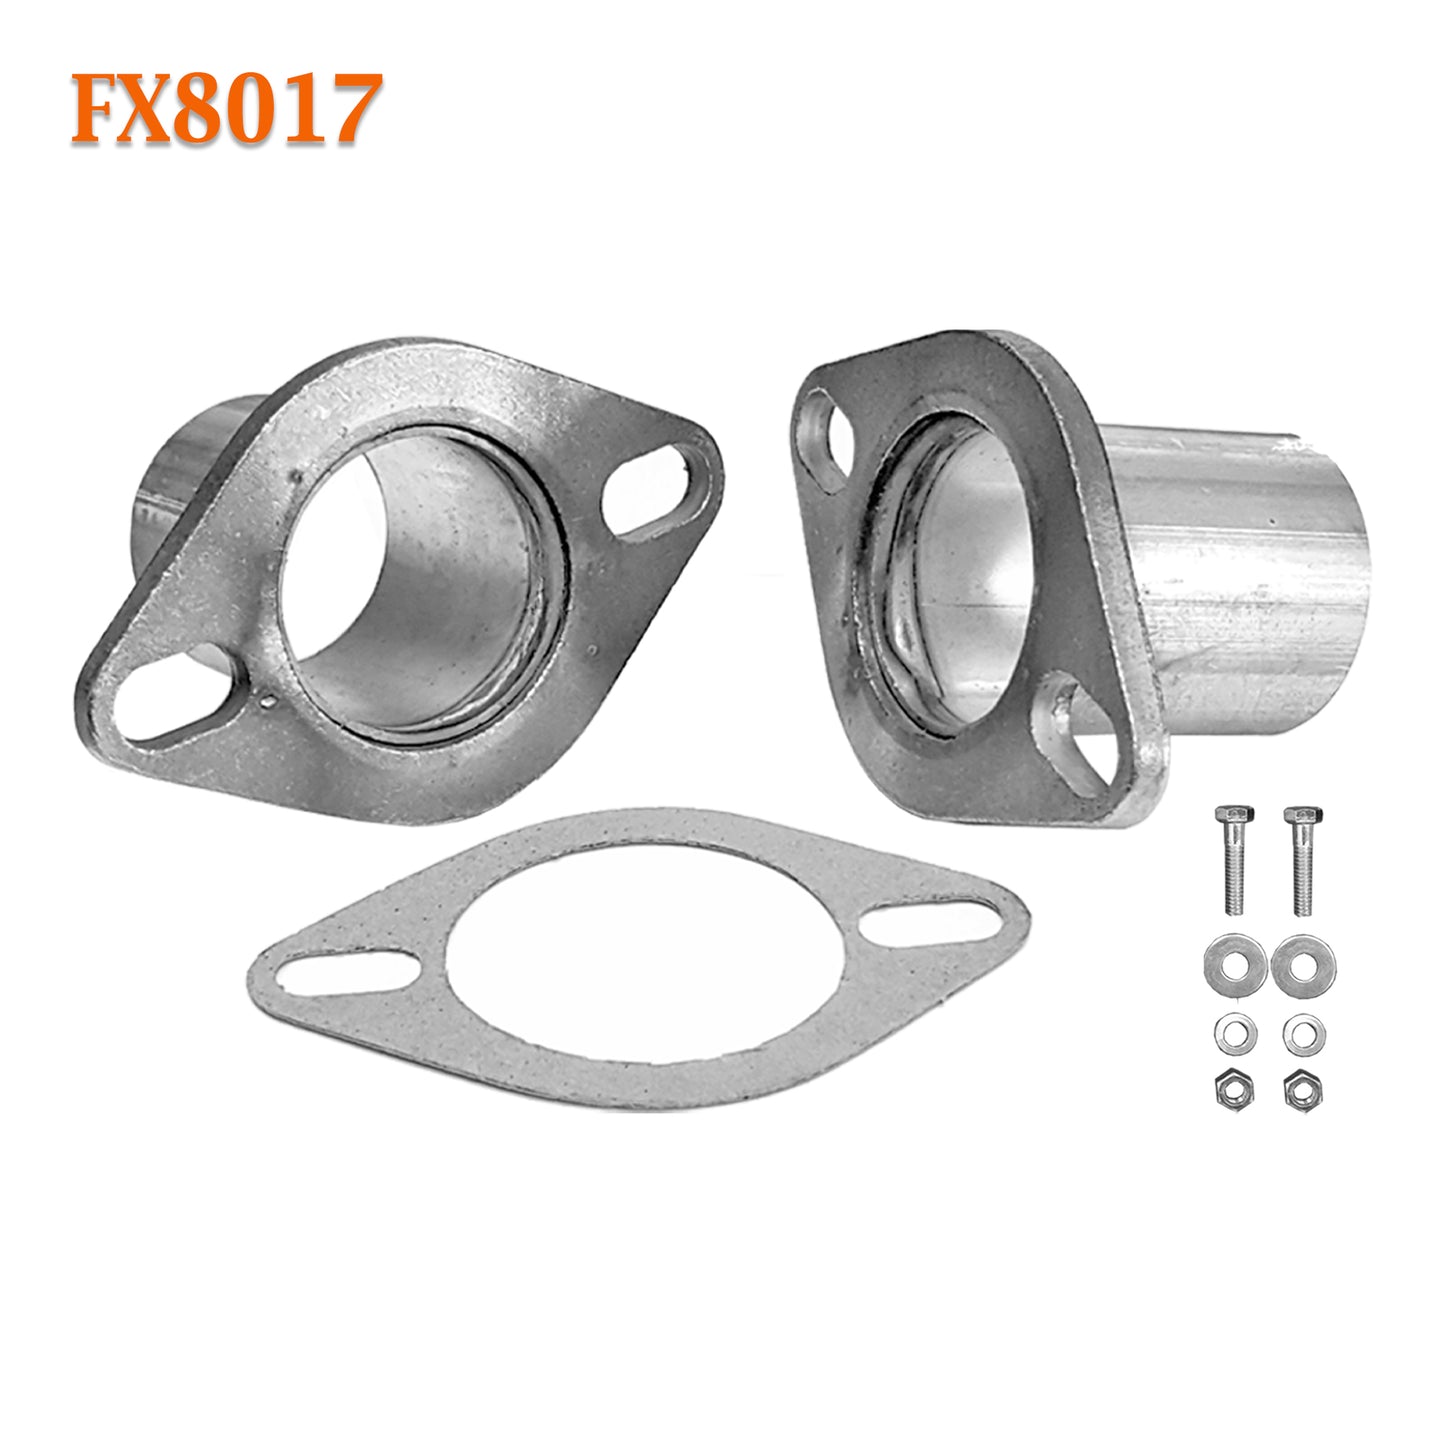 FX8017 2 1/2" OD Universal QuickFix Exhaust Oval Flange Repair Pipe Kit Gasket